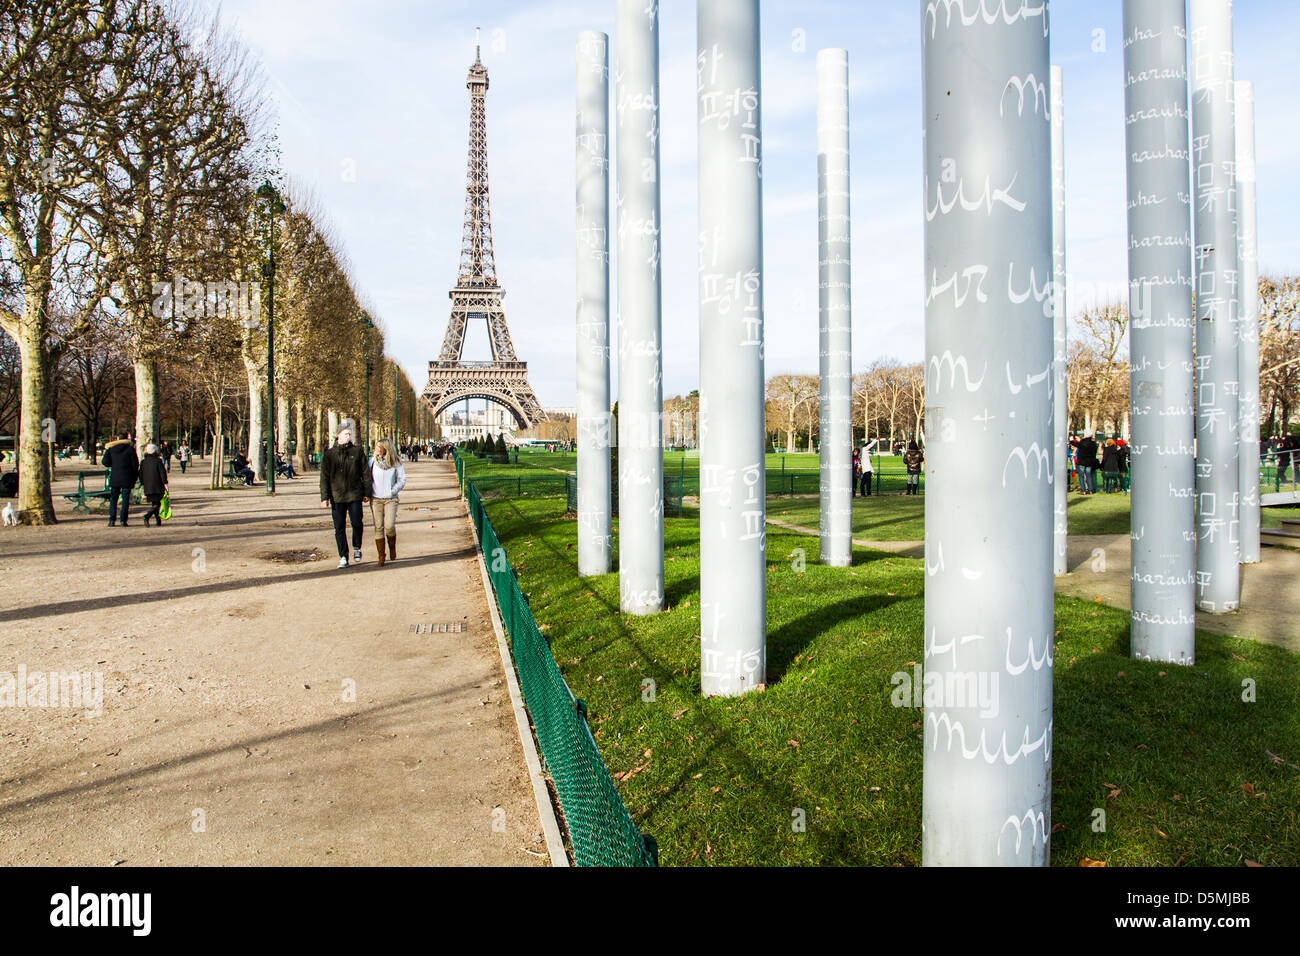 Eiffel Tower viewed from the monument The Wall for Peace (Le Mur pour la Paix). Stock Photo